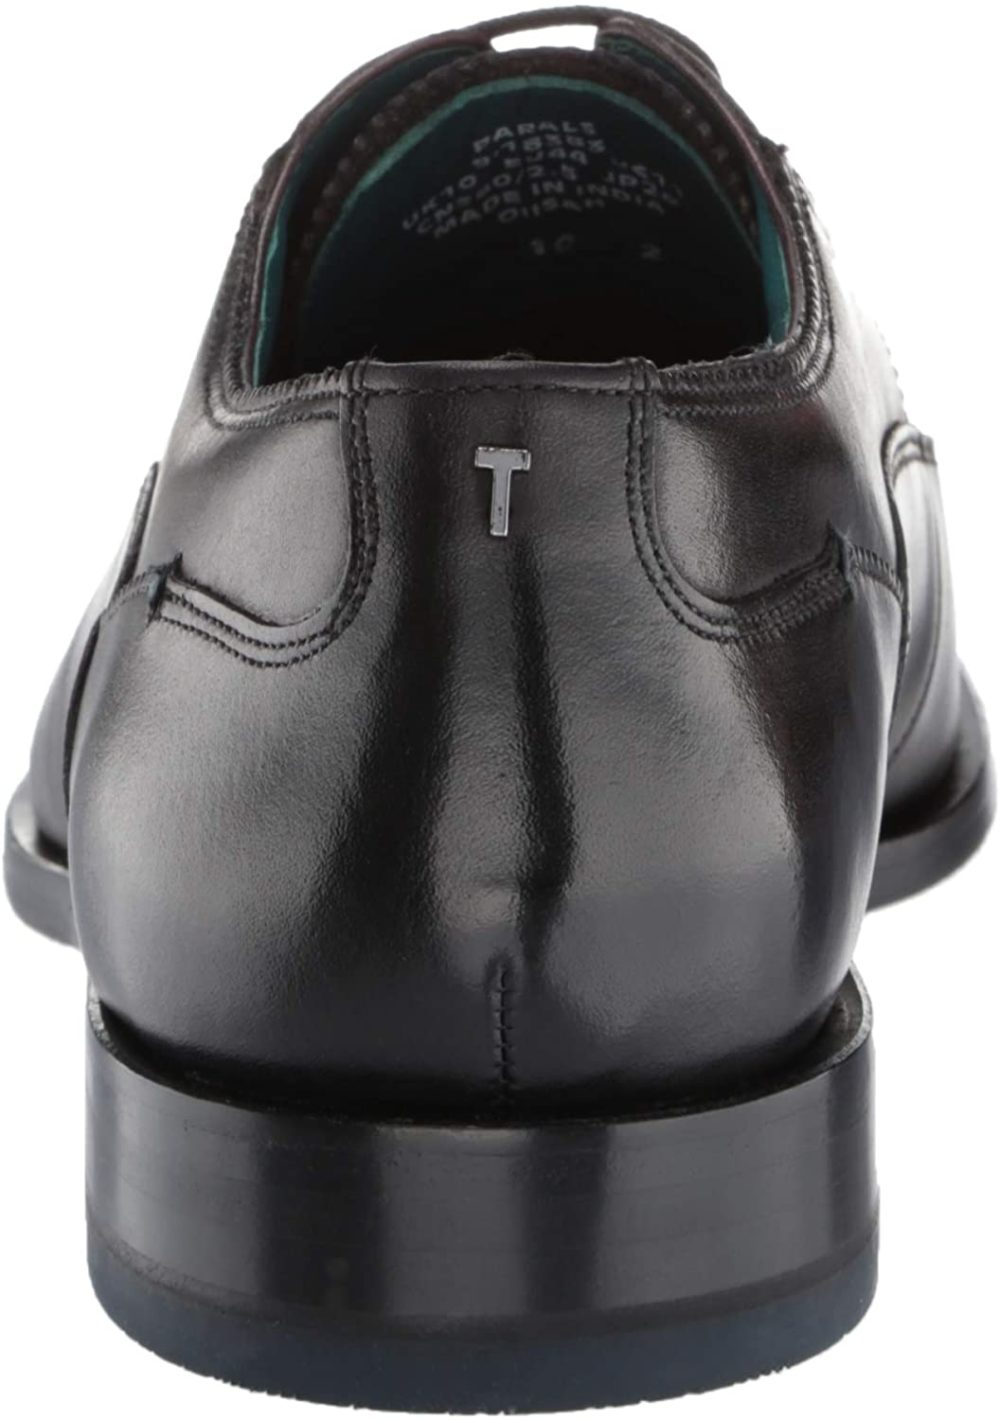 woocommerce-673321-2209615.cloudwaysapps.com-ted-baker-mens-black-leather-parals-oxford-shoes